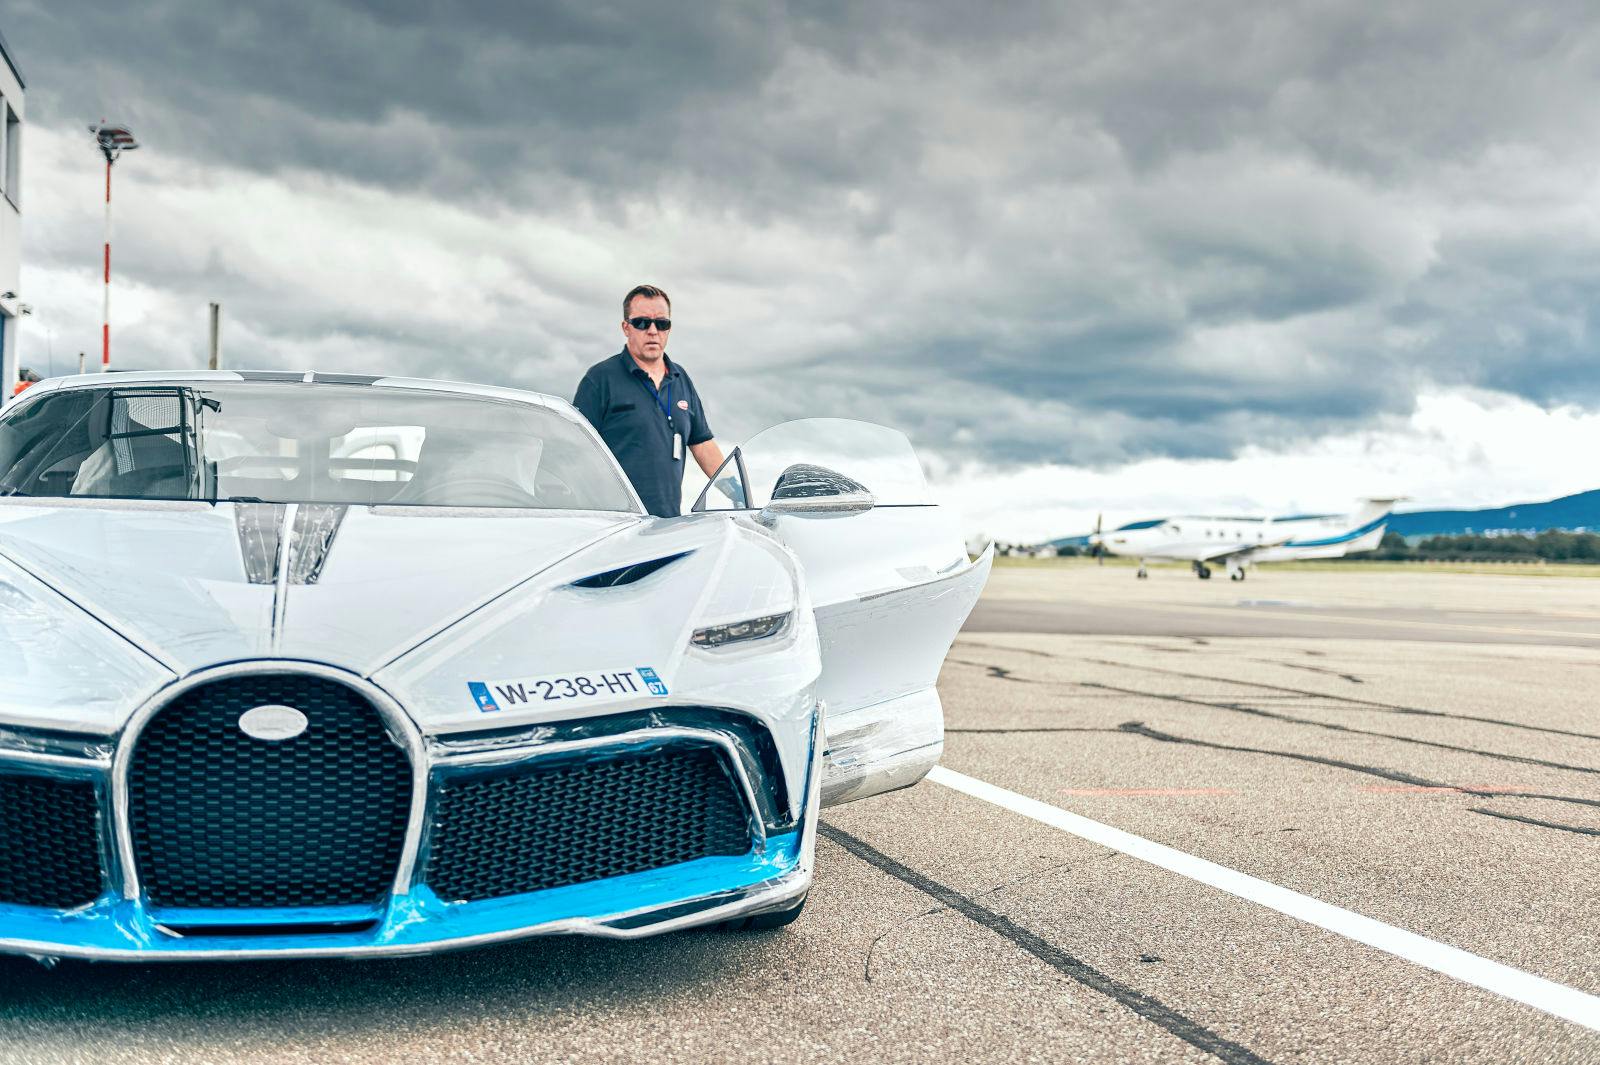 Steve Jenny, Bugatti test driver since 2004, has driven more than 350,000 km in Veyron, Chiron and Divo models.